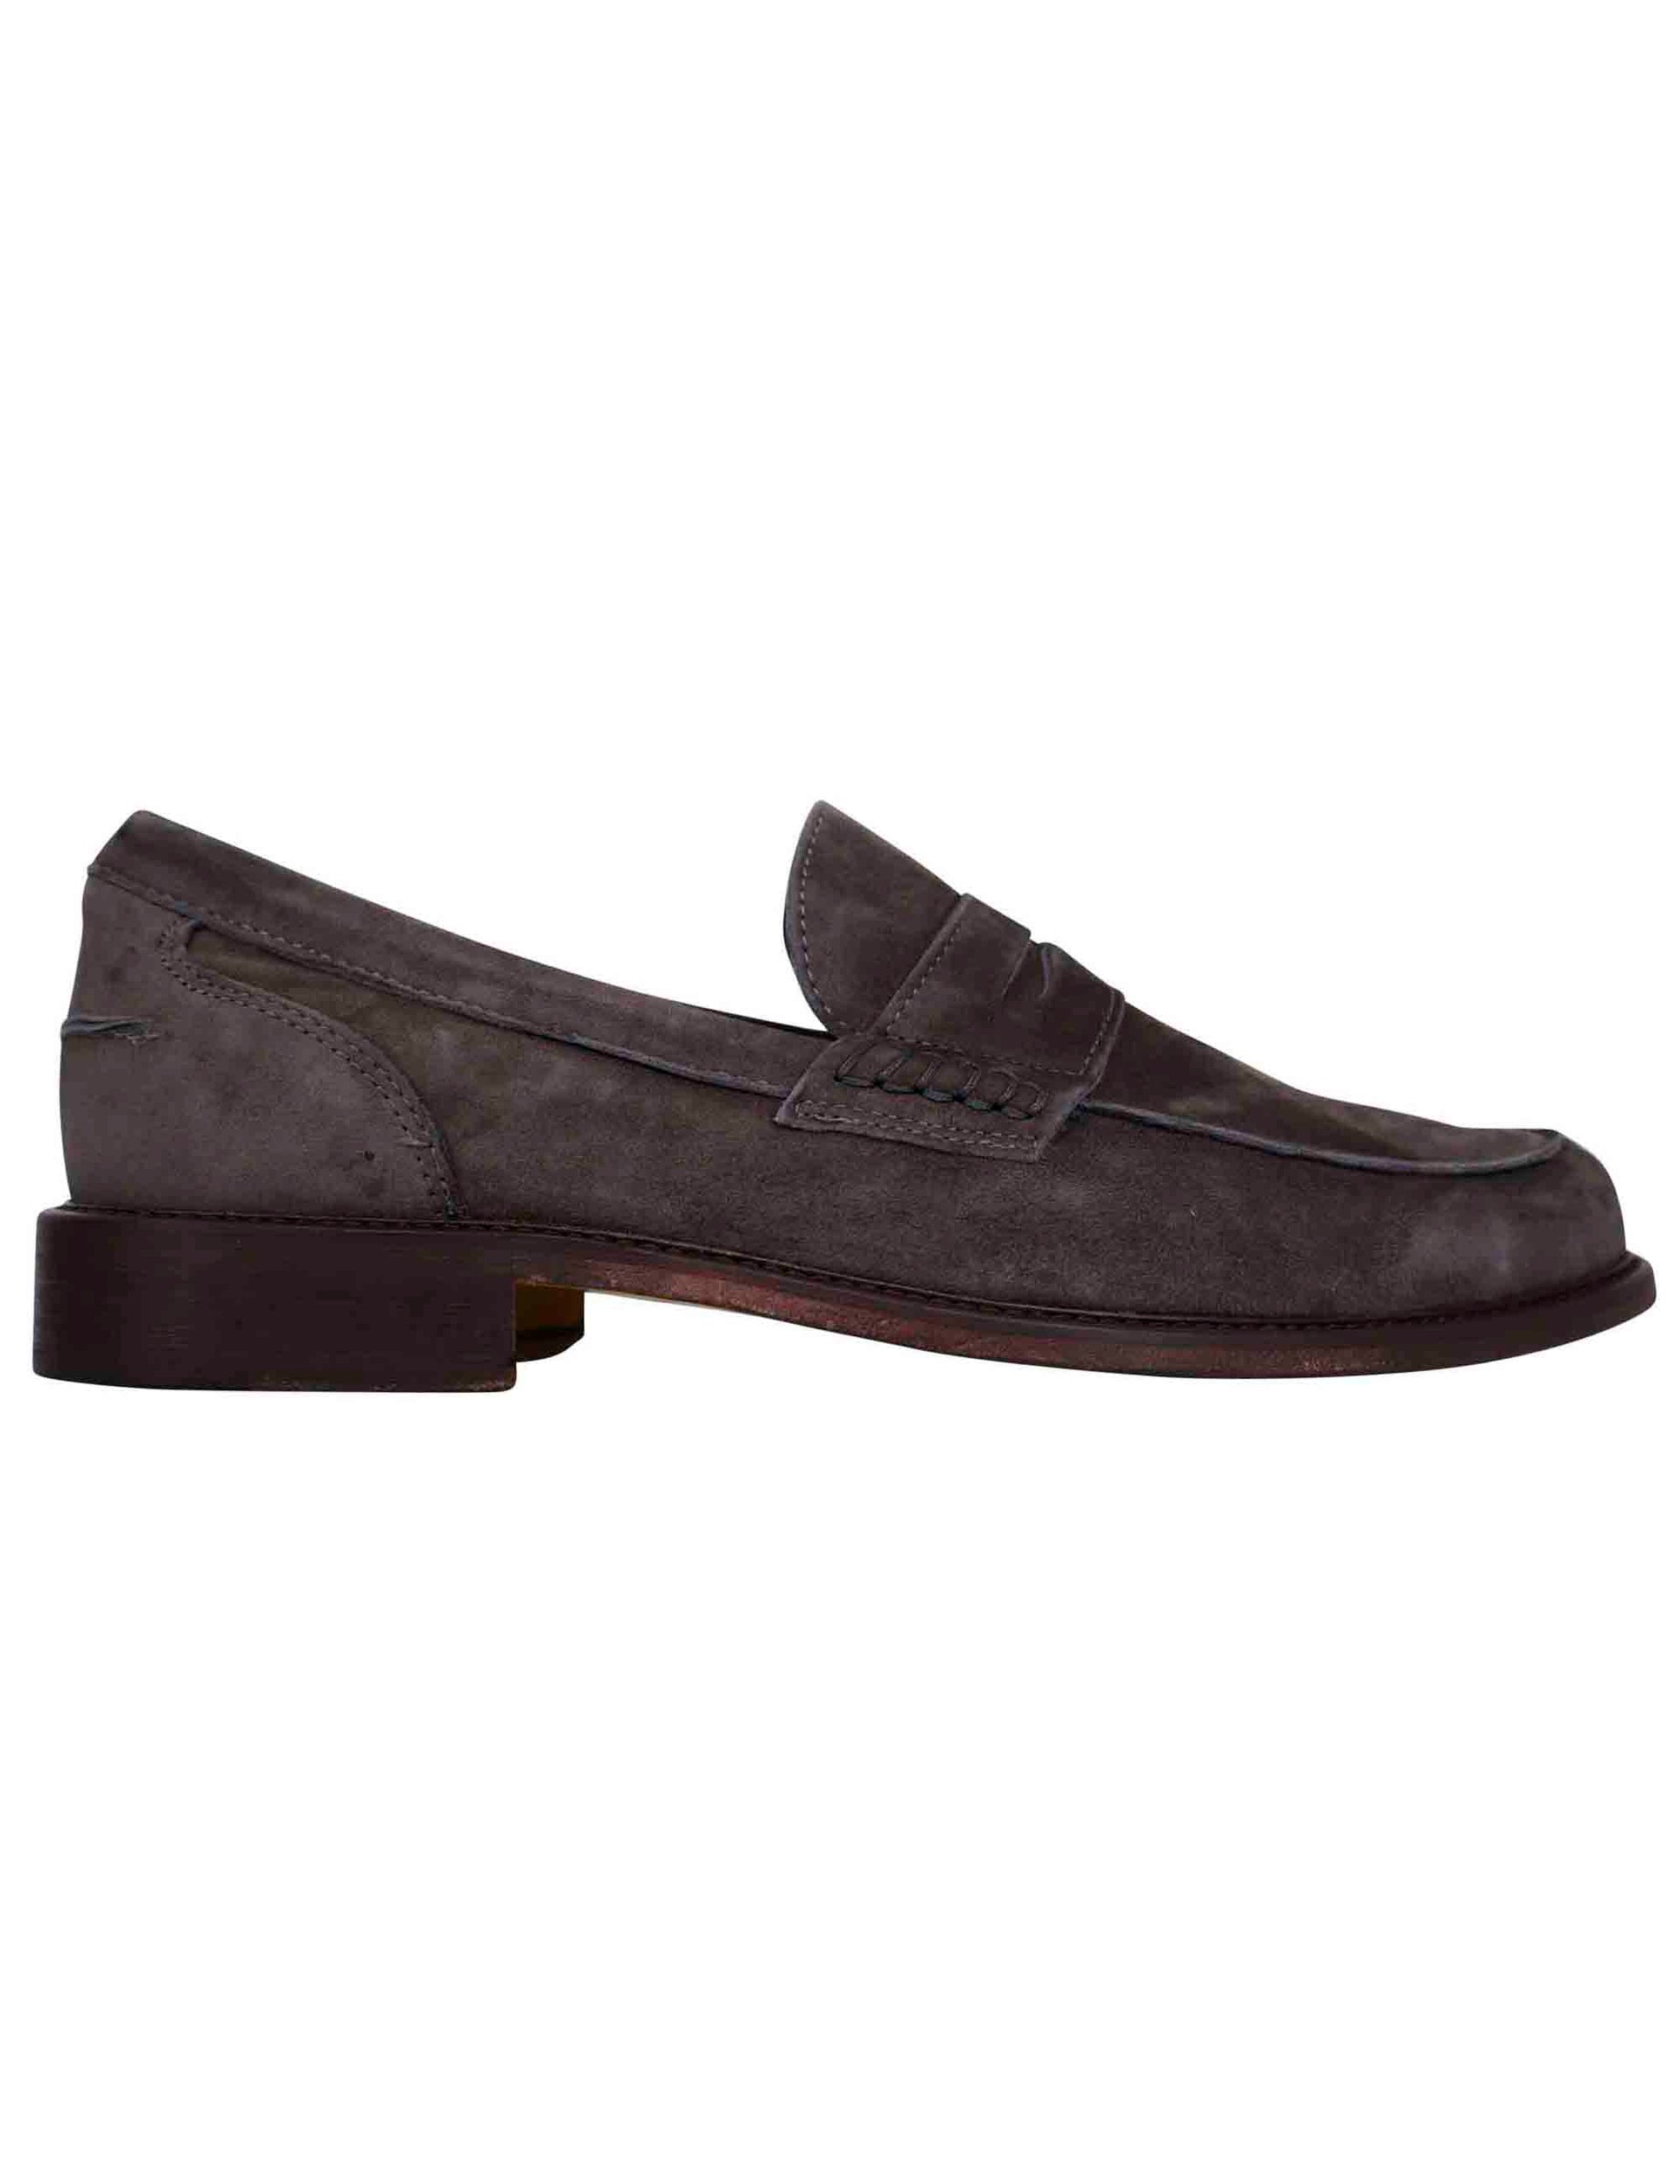 Men's moccasins in gray suede with stitched leather sole